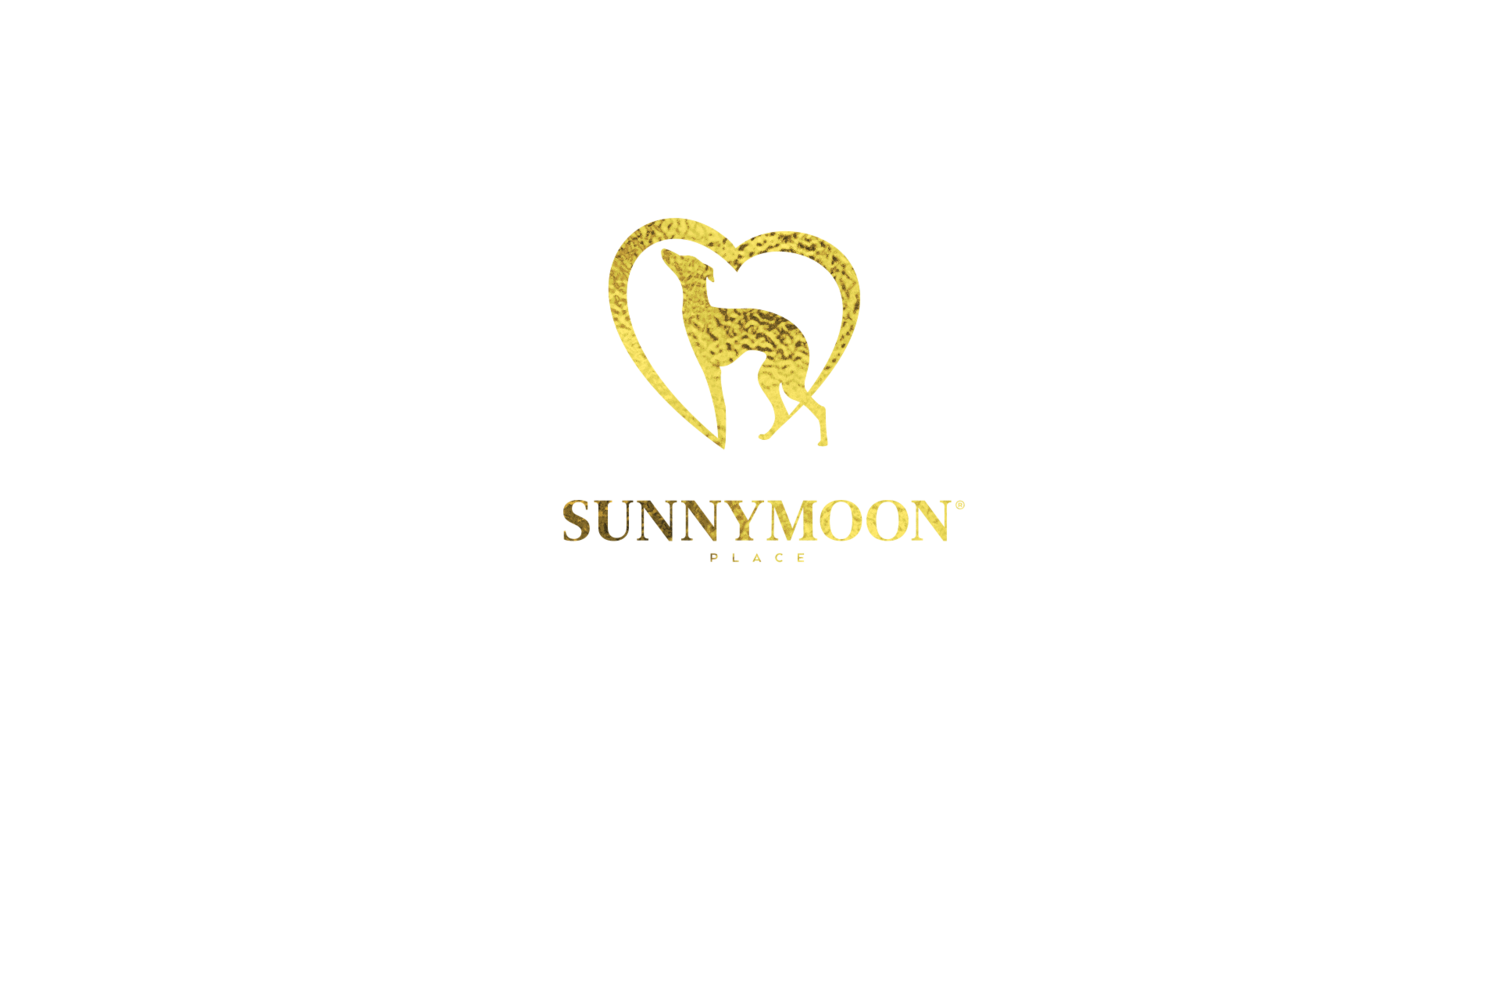 <span style="font-weight: bold;">X&nbsp; SUNNYMOON PLACE&nbsp;</span>